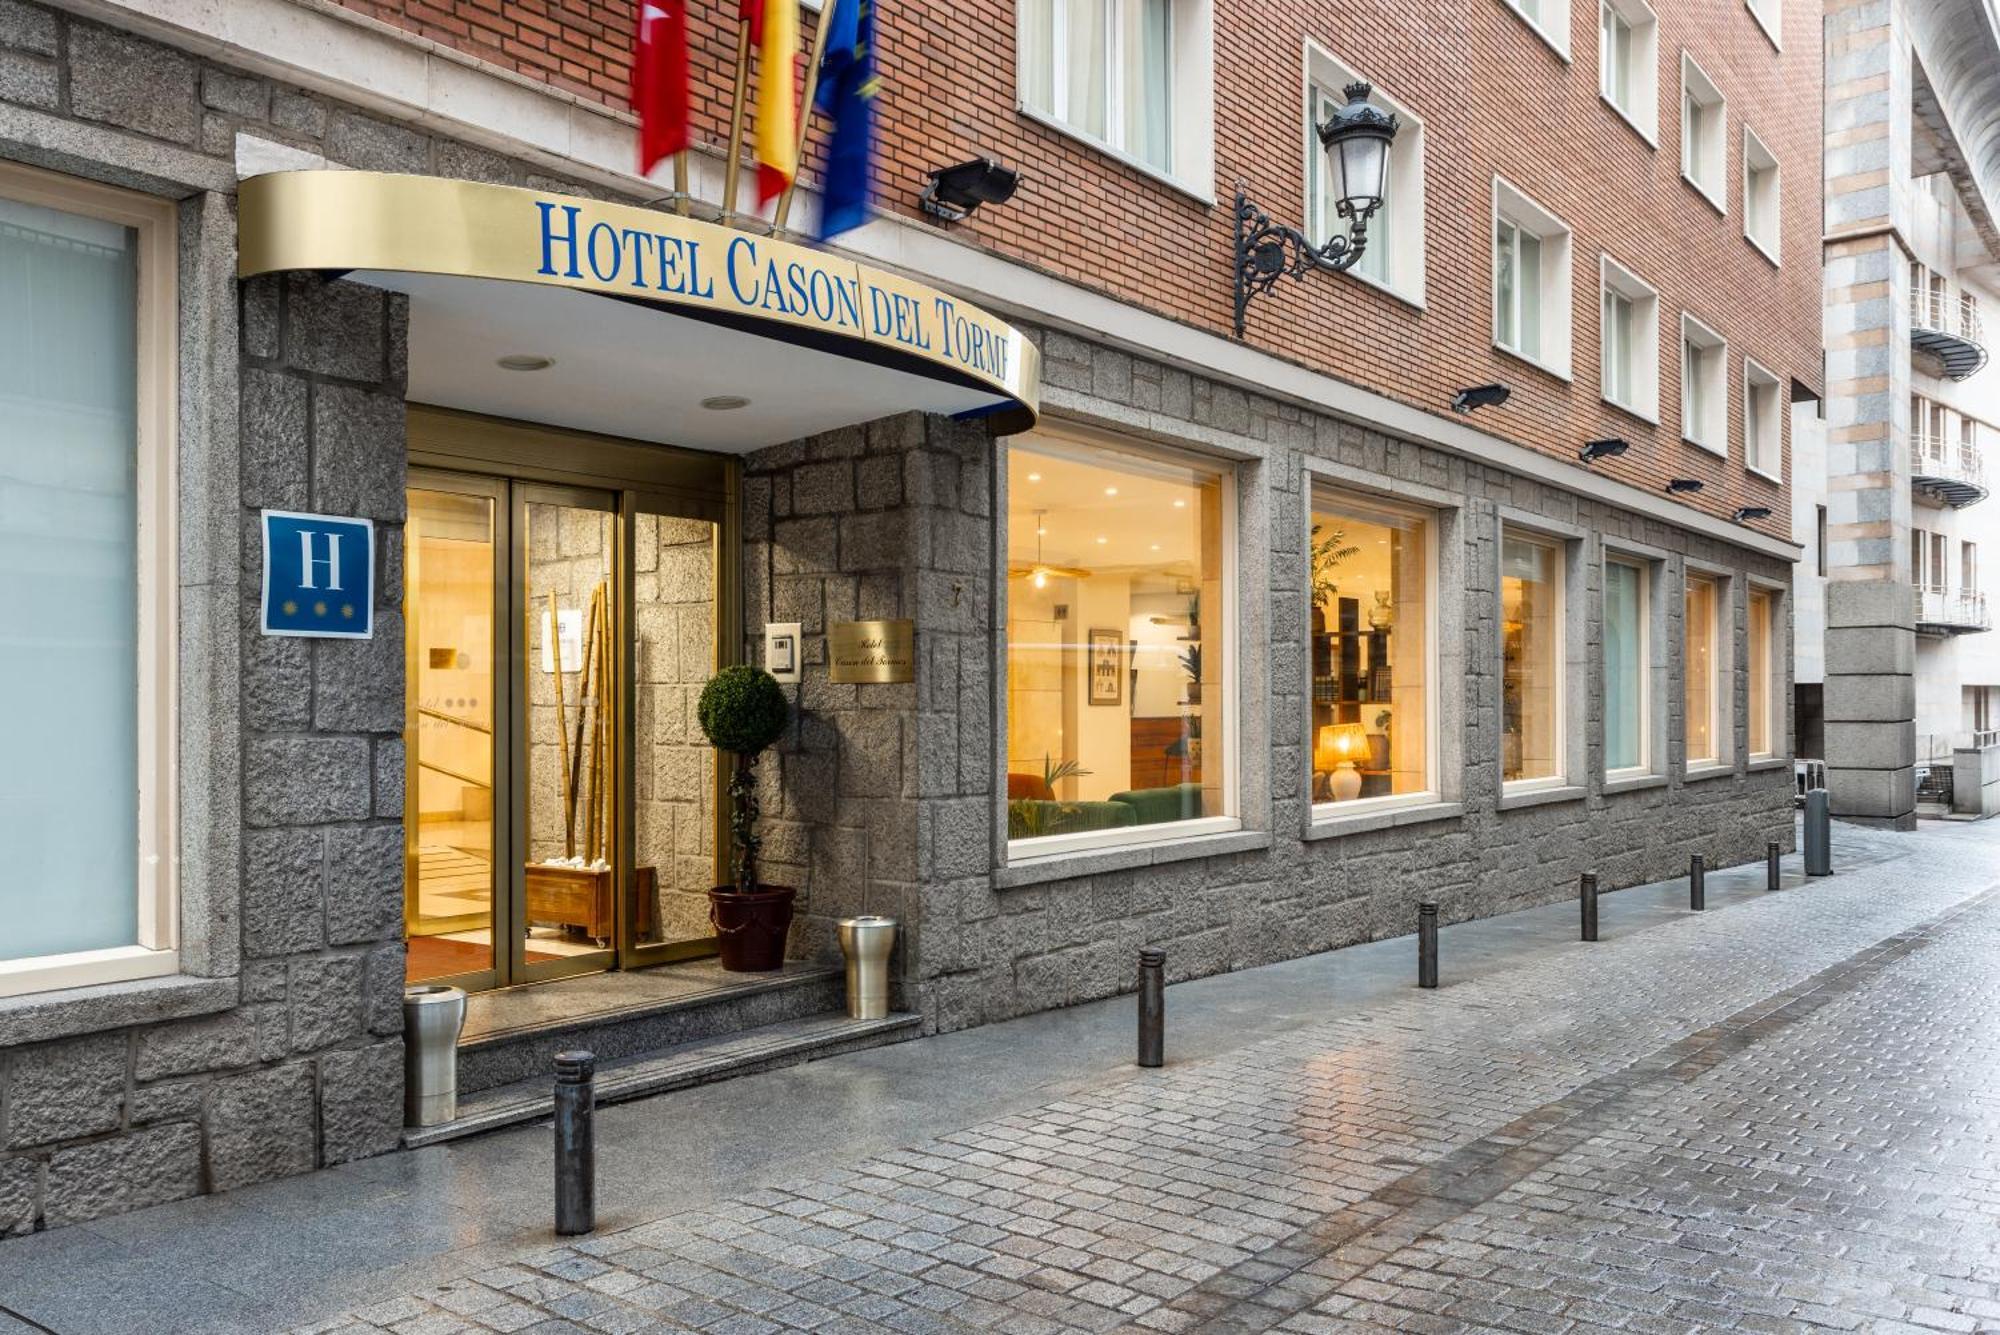 Hotel Cason Del Tormes By Happyculture Madrid Exterior photo